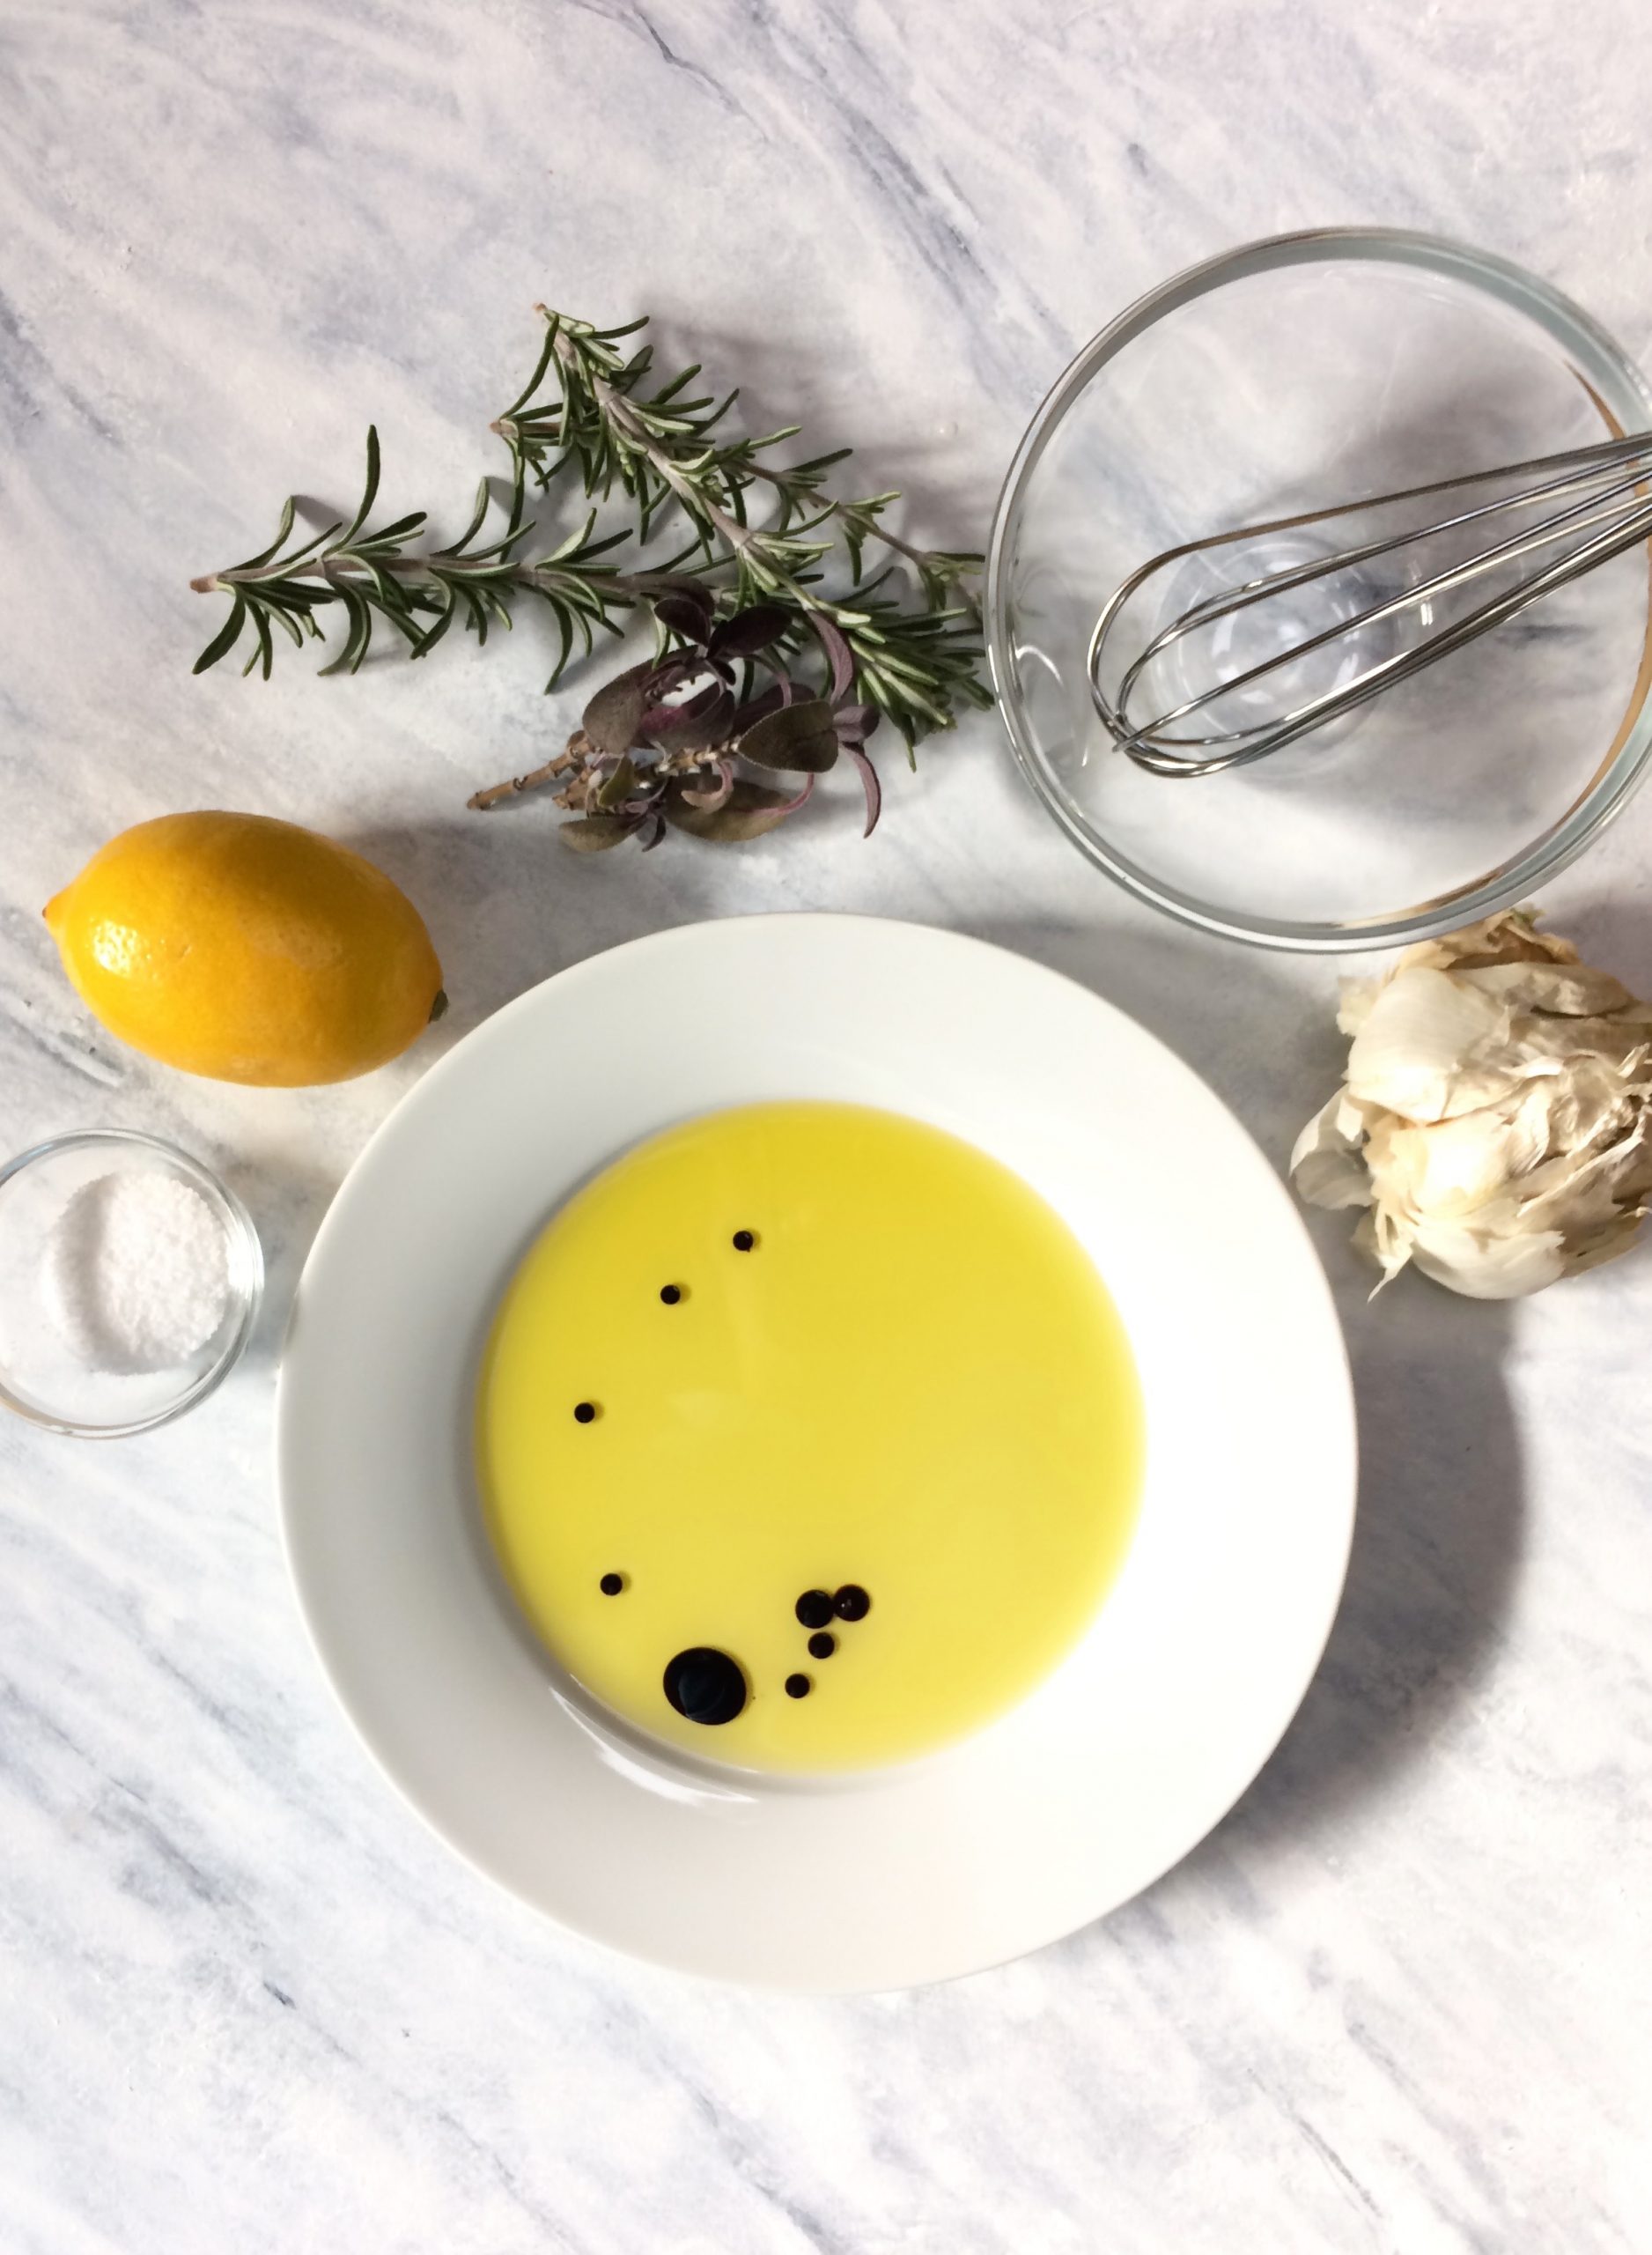 Olive oil, which has tons of antioxidants